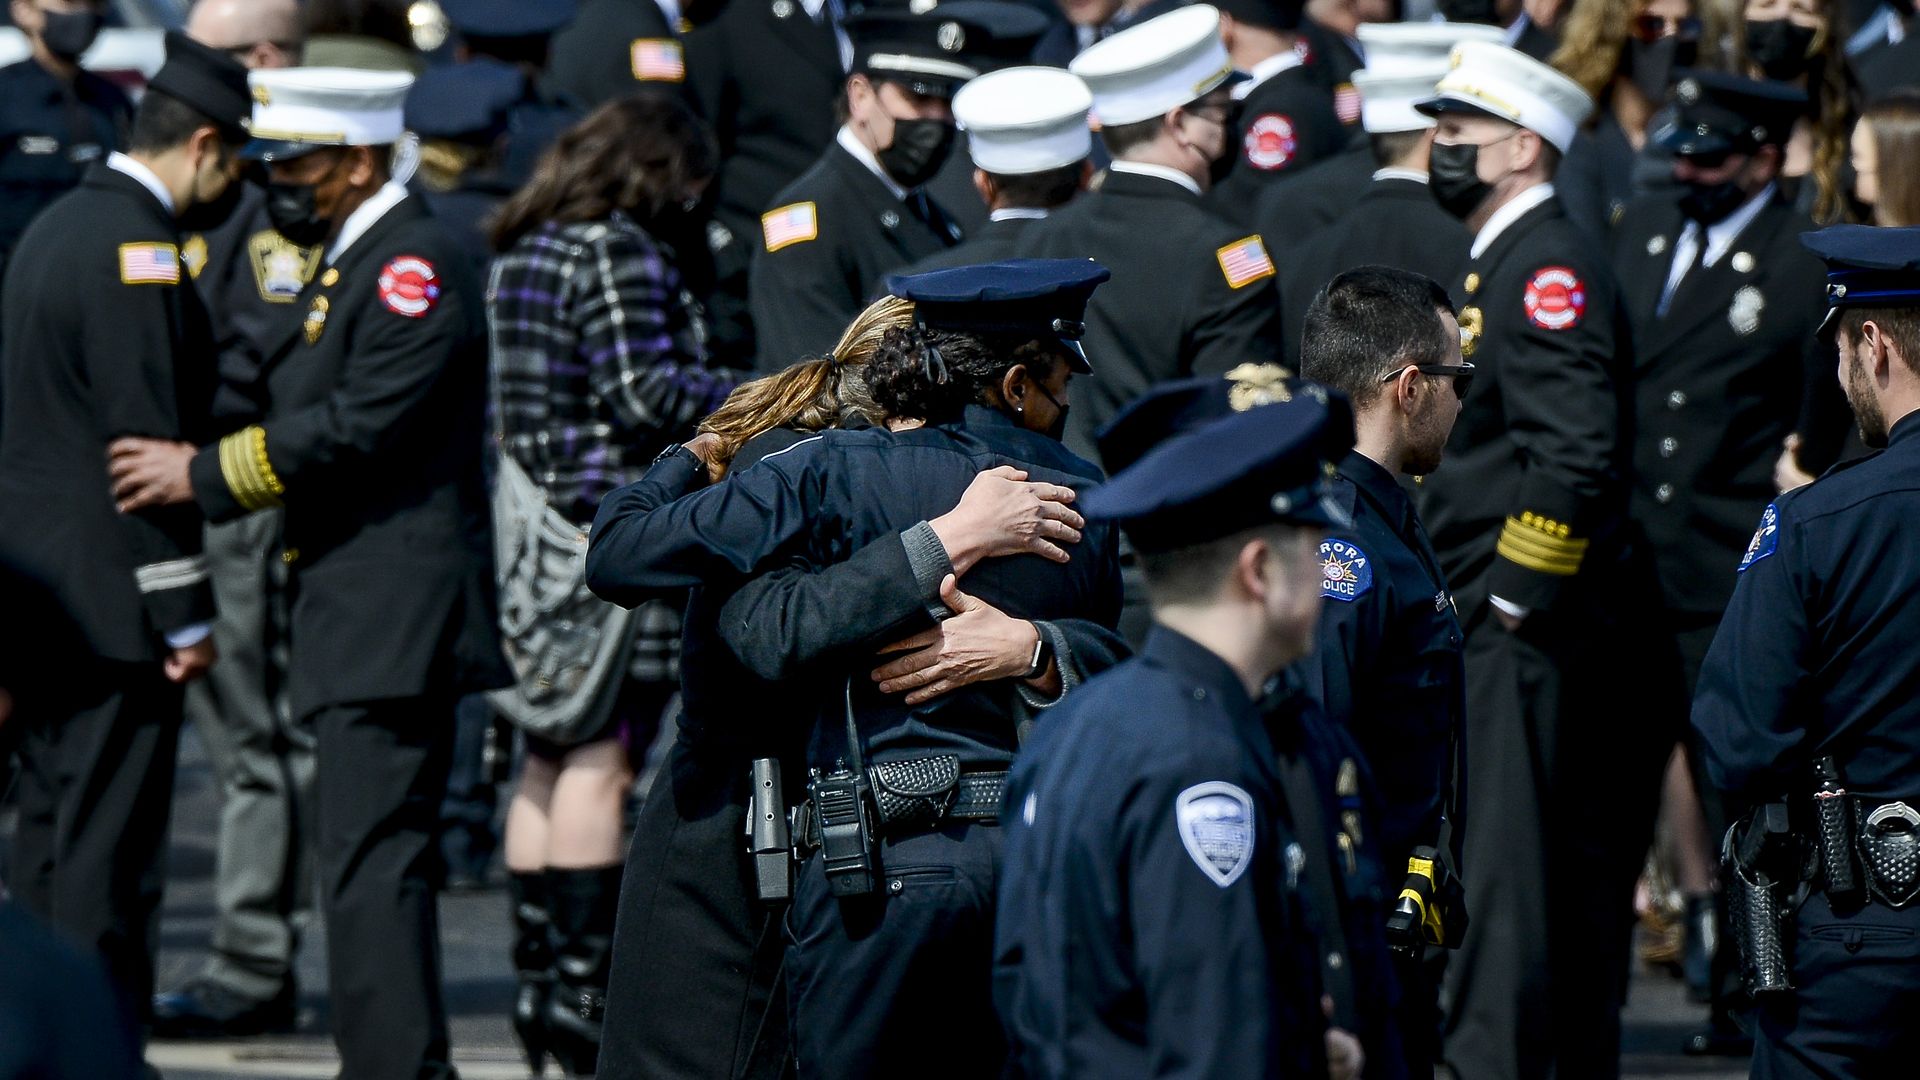 A memorial service for Boulder Police officer Eric Talley, who was killed in a shooting at a King Soopers grocery store in Boulder on March 22, 2021. Photo: Michael Ciaglo/Getty Images